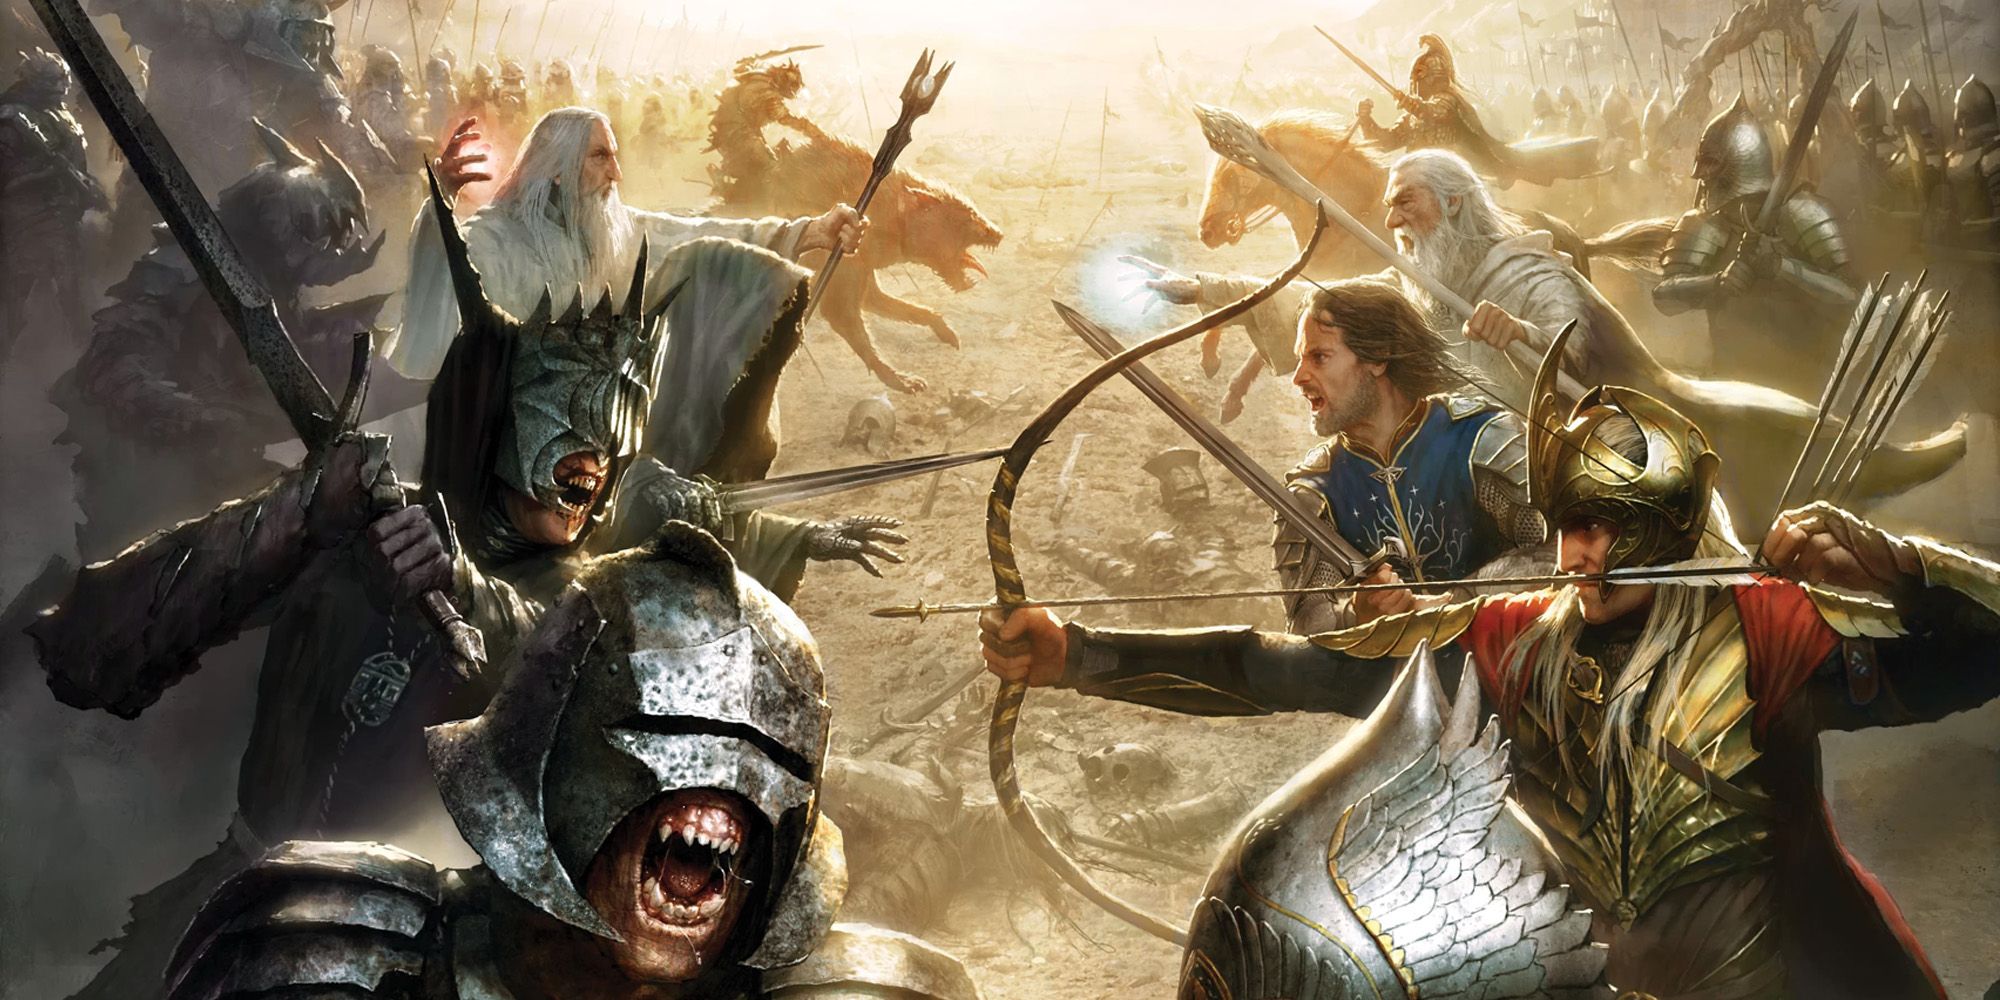 LOTR: Conquest illustration with Sauron's forces on the left facing up against Gandalf, Aragorn, and allies on the right.